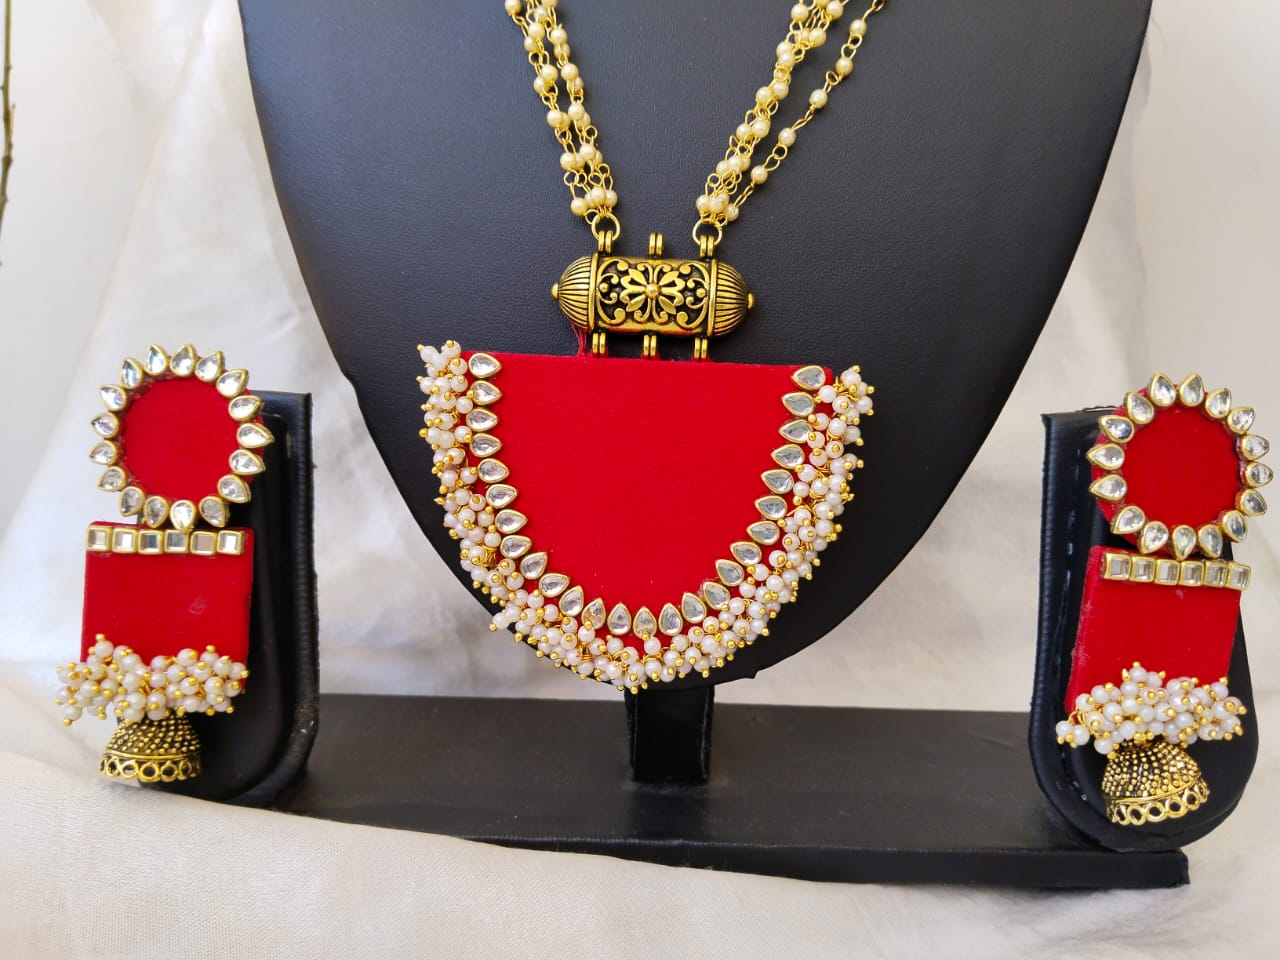 Black necklace and earrings stand with red necklace and earrings with golden beads details